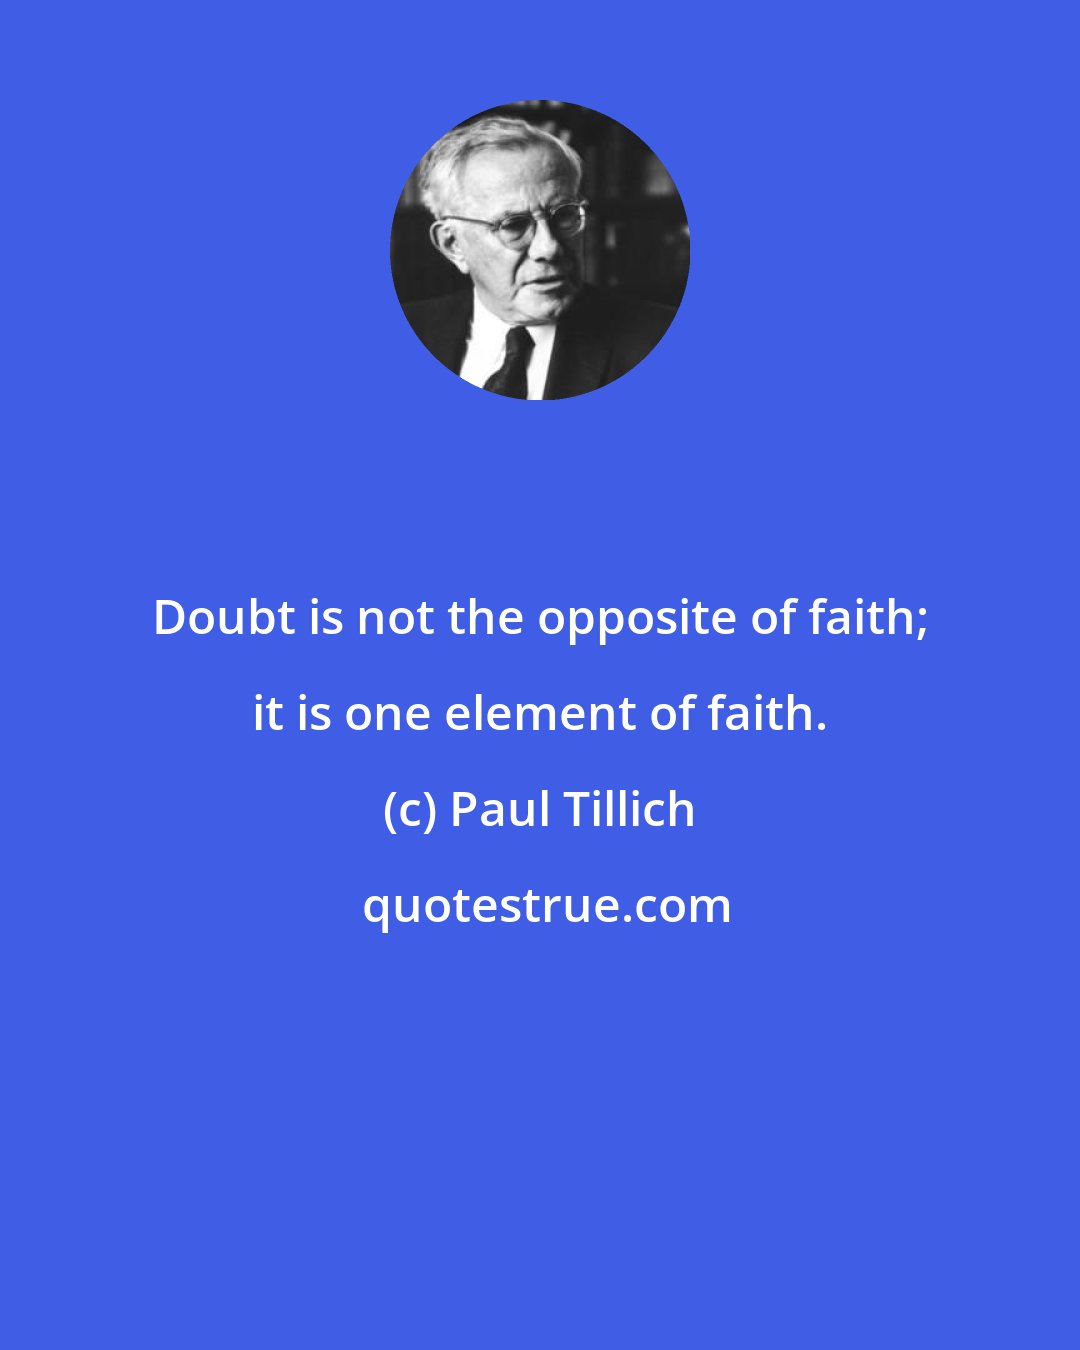 Paul Tillich: Doubt is not the opposite of faith; it is one element of faith.